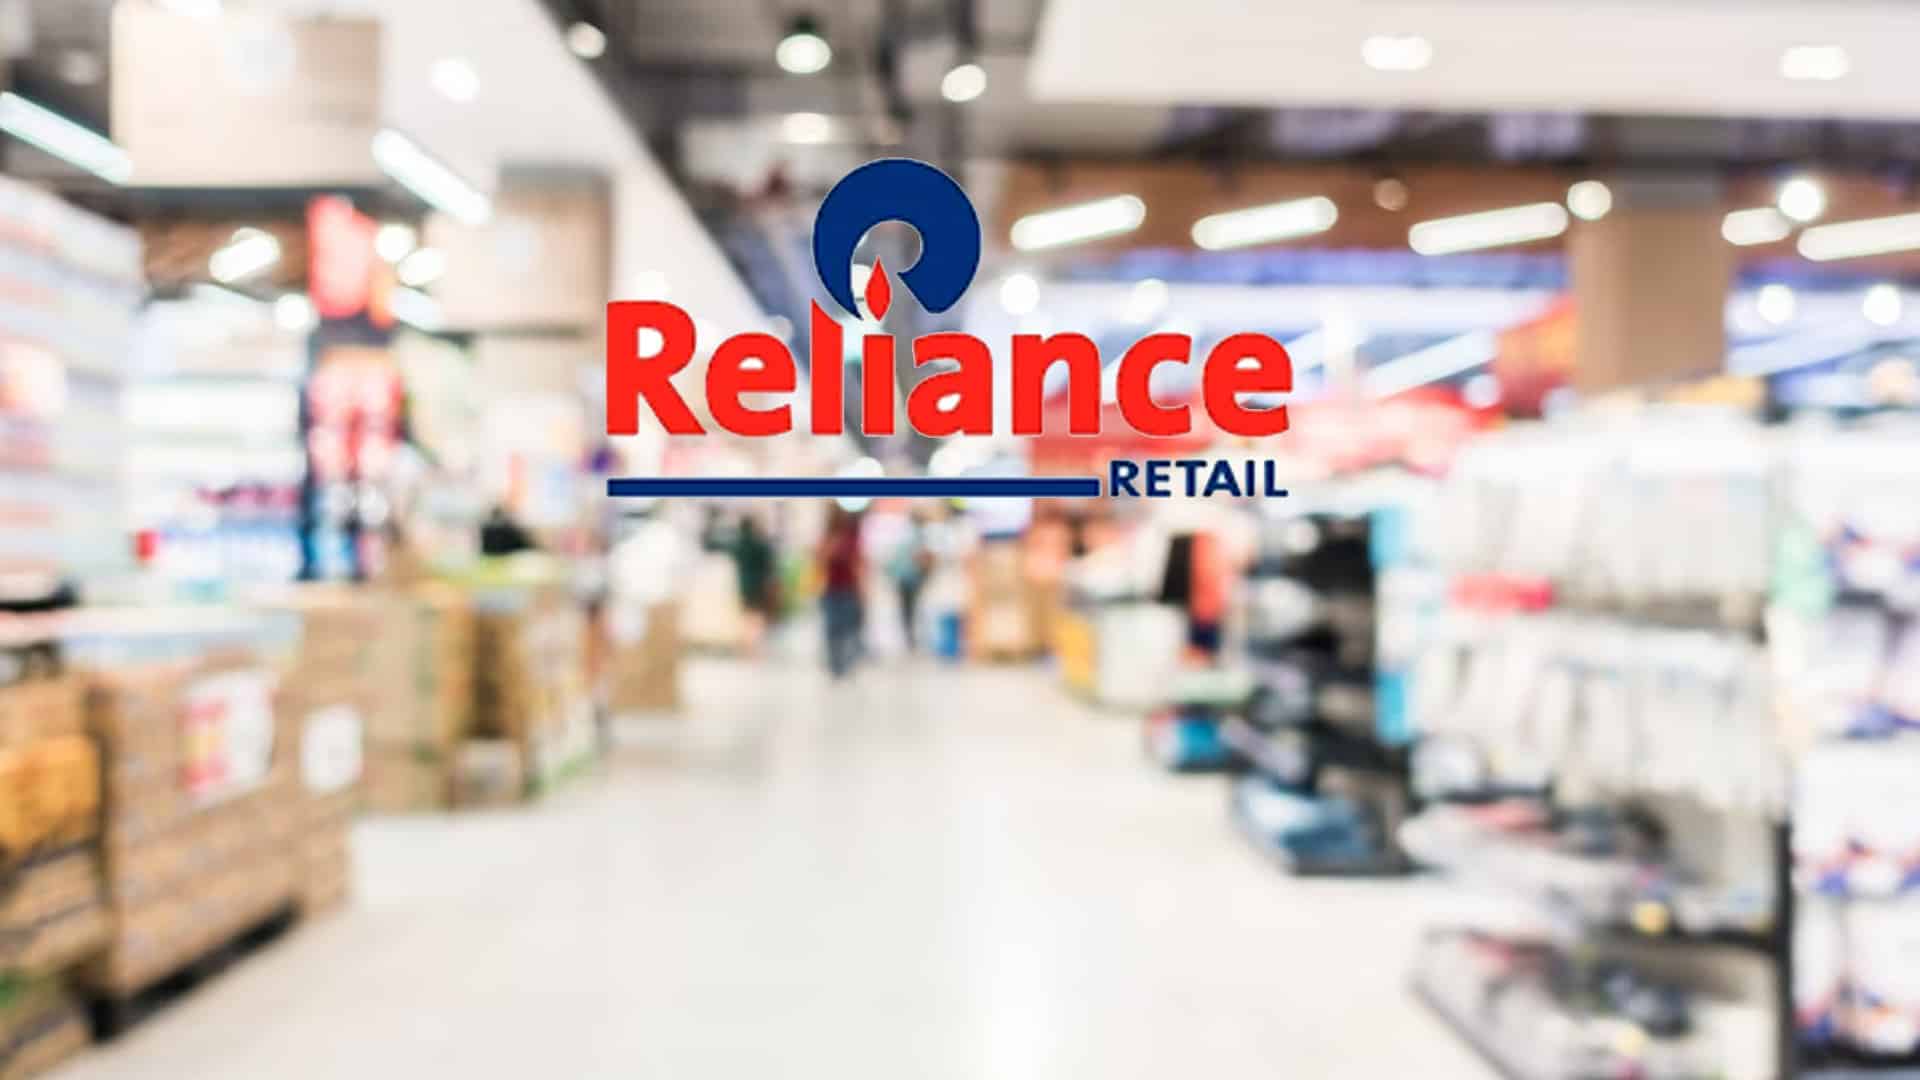 Reliance Retail enters into partnership with Maliban, acquires Raskik and Toffeeman